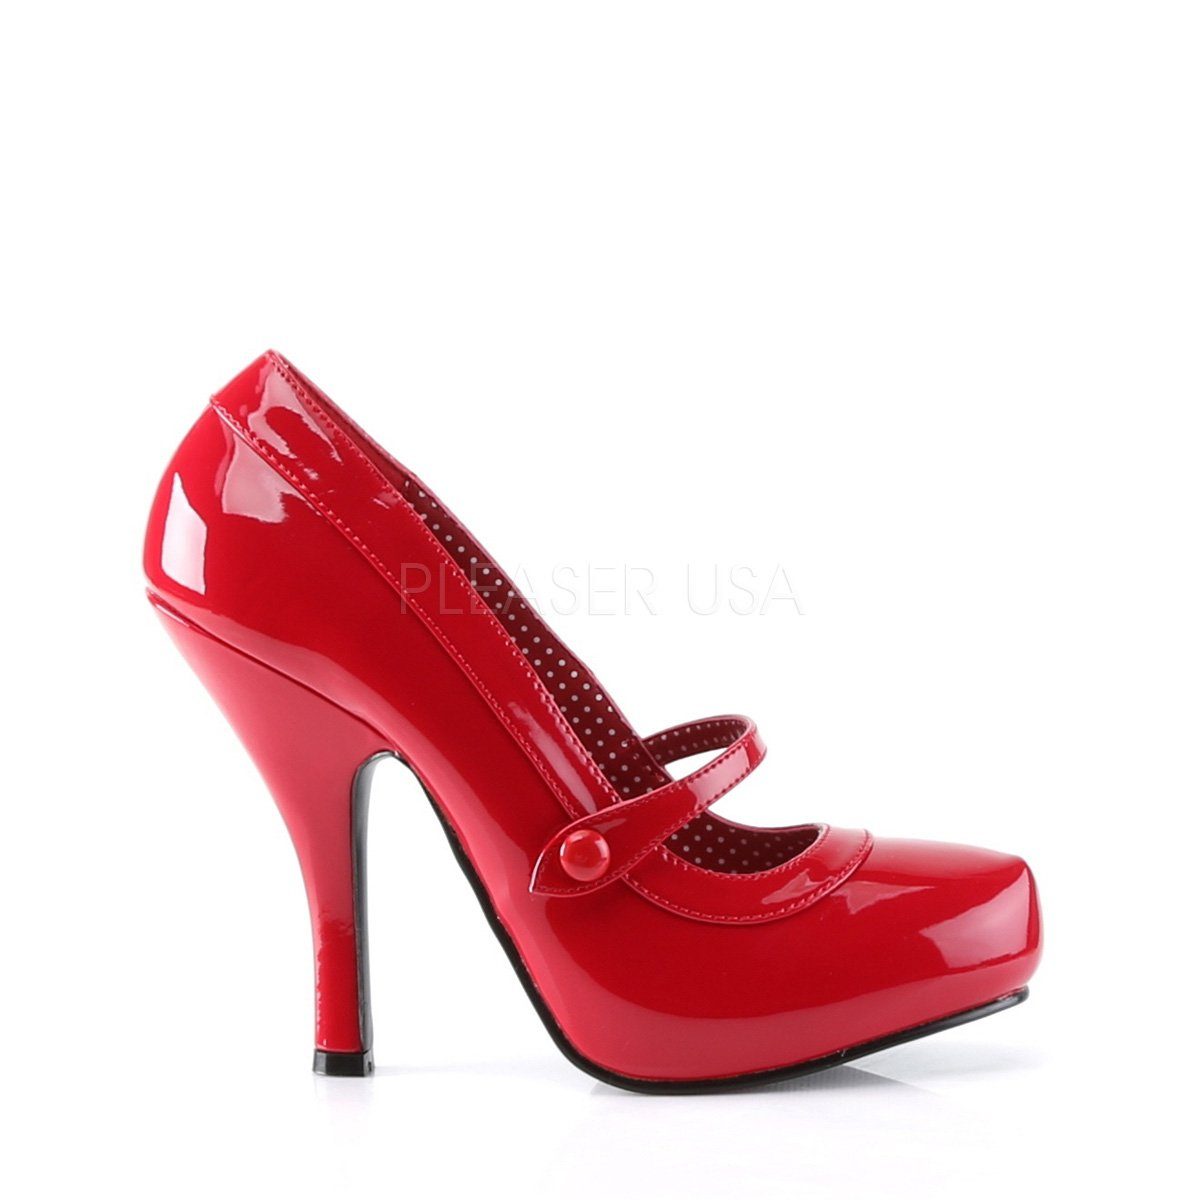 CUTIEPIE-02 - Mary Pin Janes Rot High-Heel-Pumps Couture Up